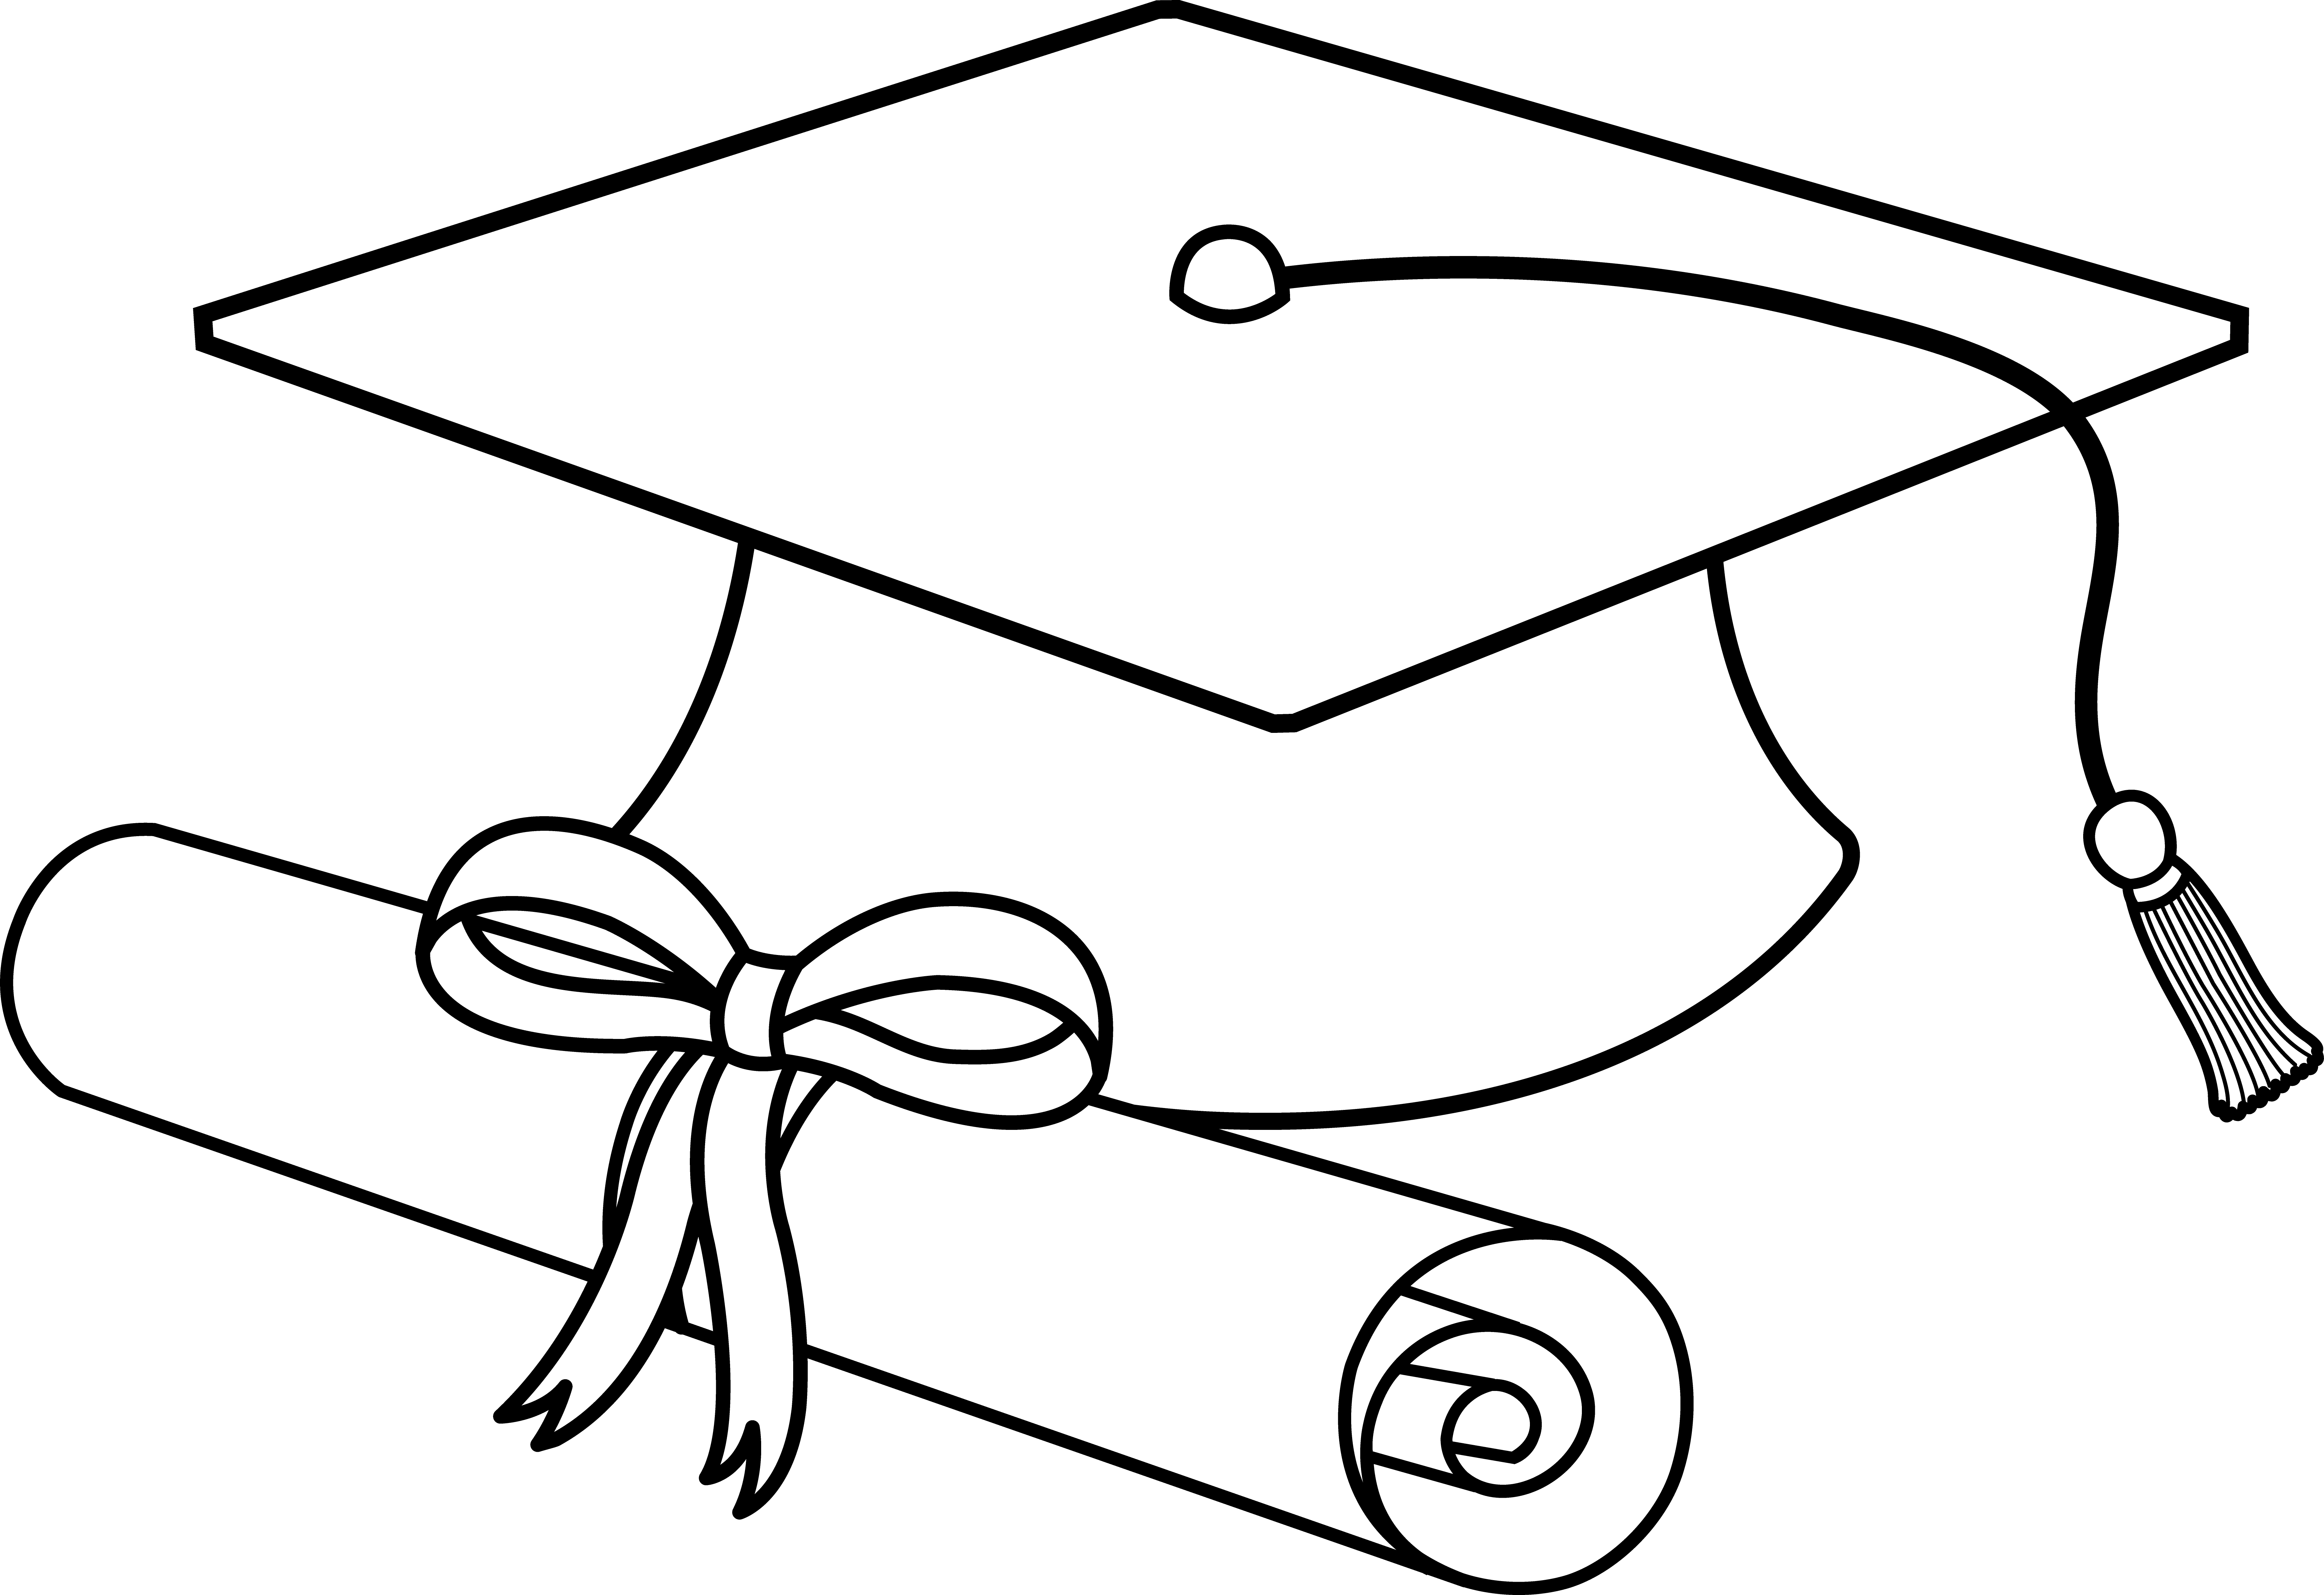 Cap and gown diploma clipart